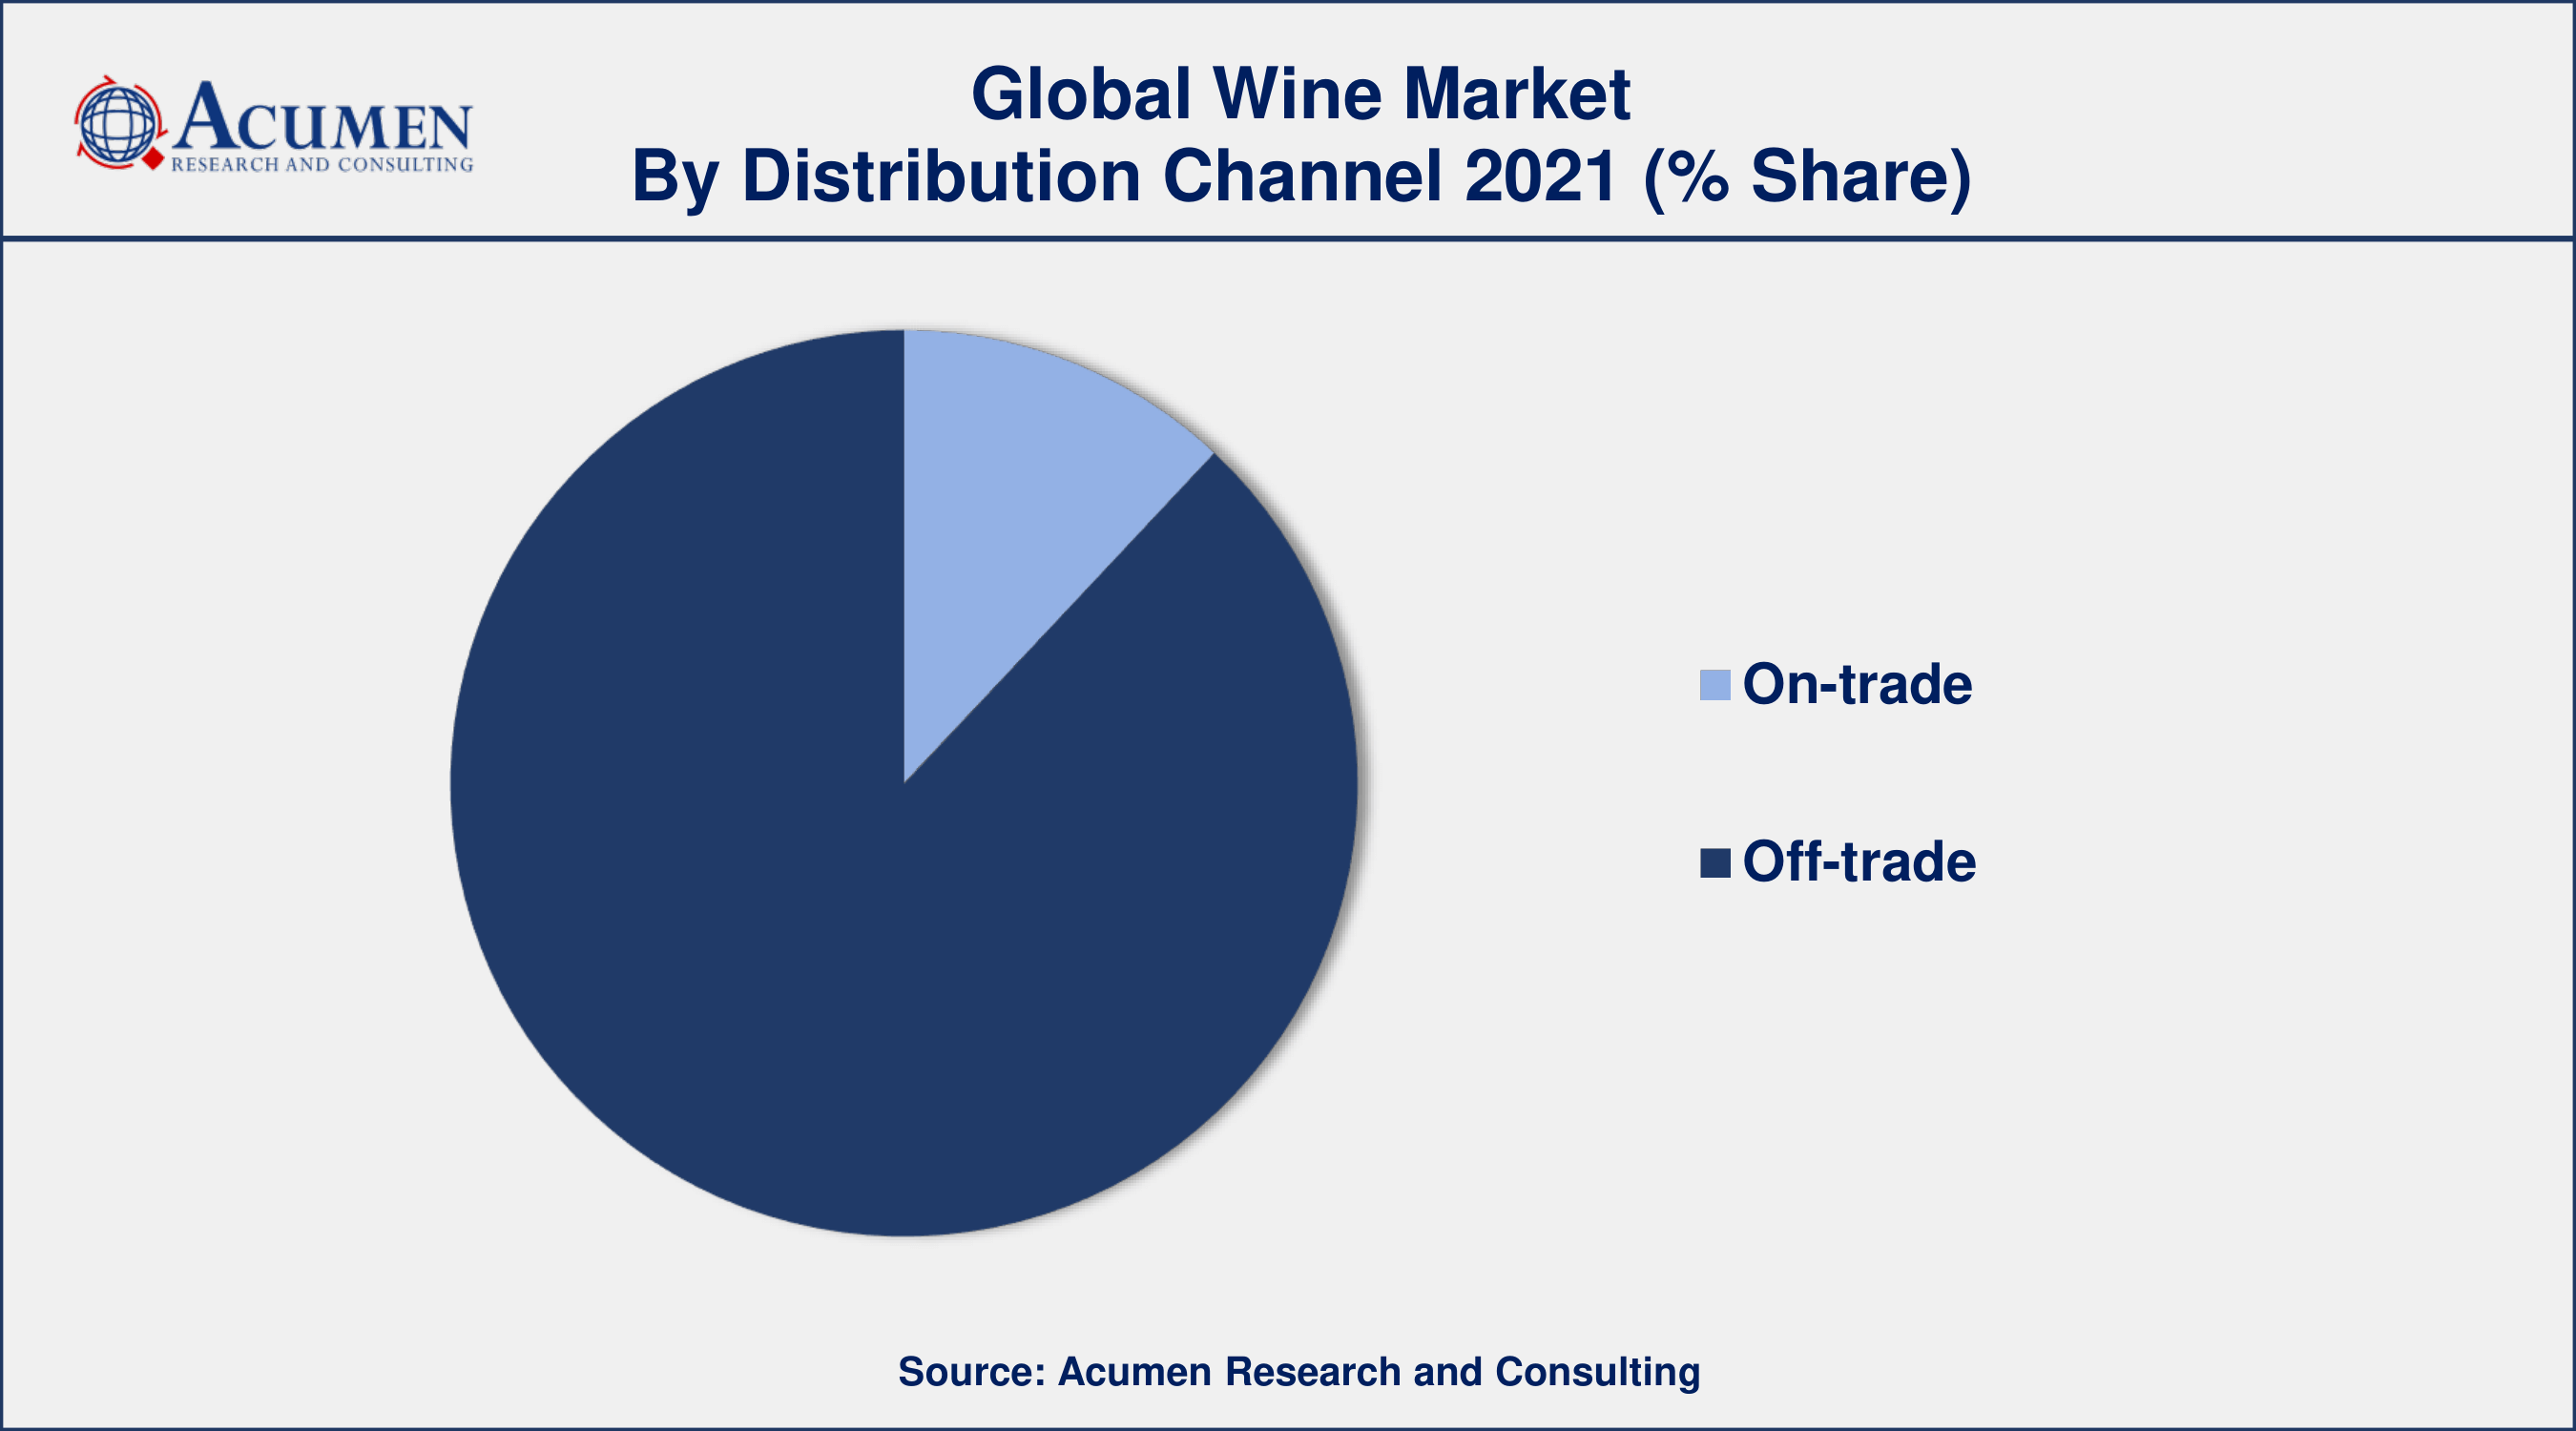 Among distribution channel, off-trade sector engaged more than 85% of the total market share